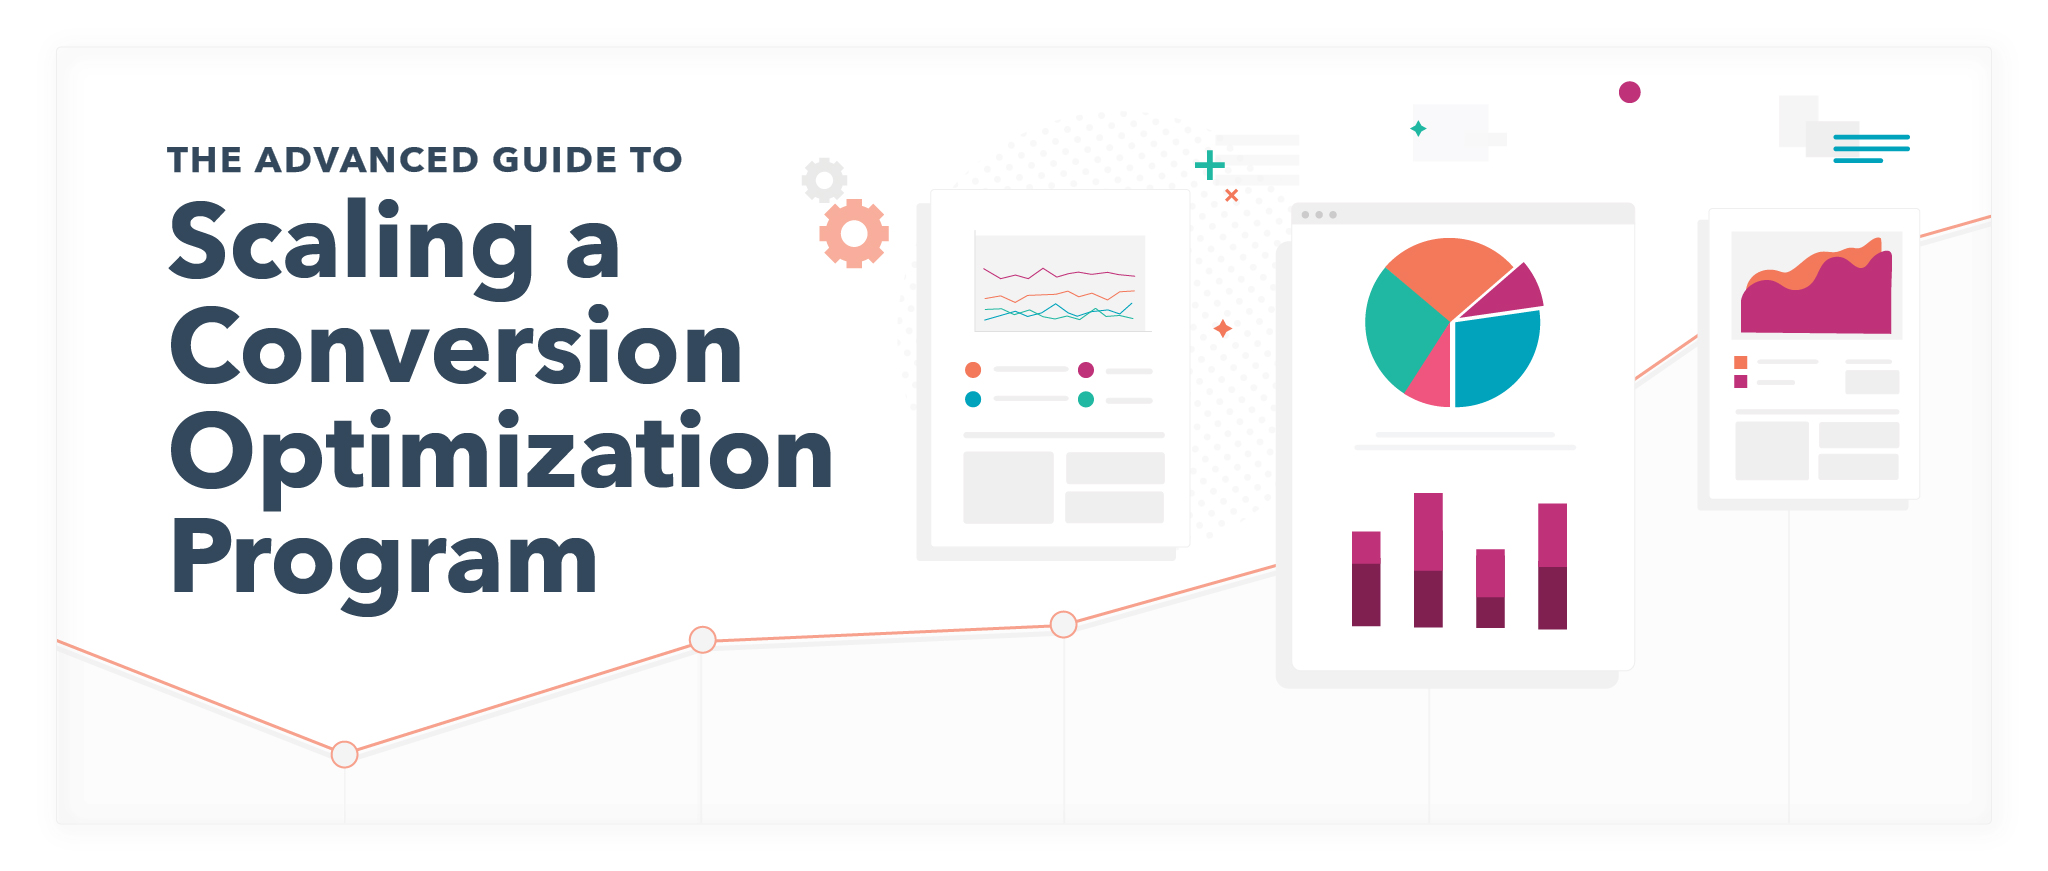 The Advanced Guide to Scaling a Conversion Optimization Program